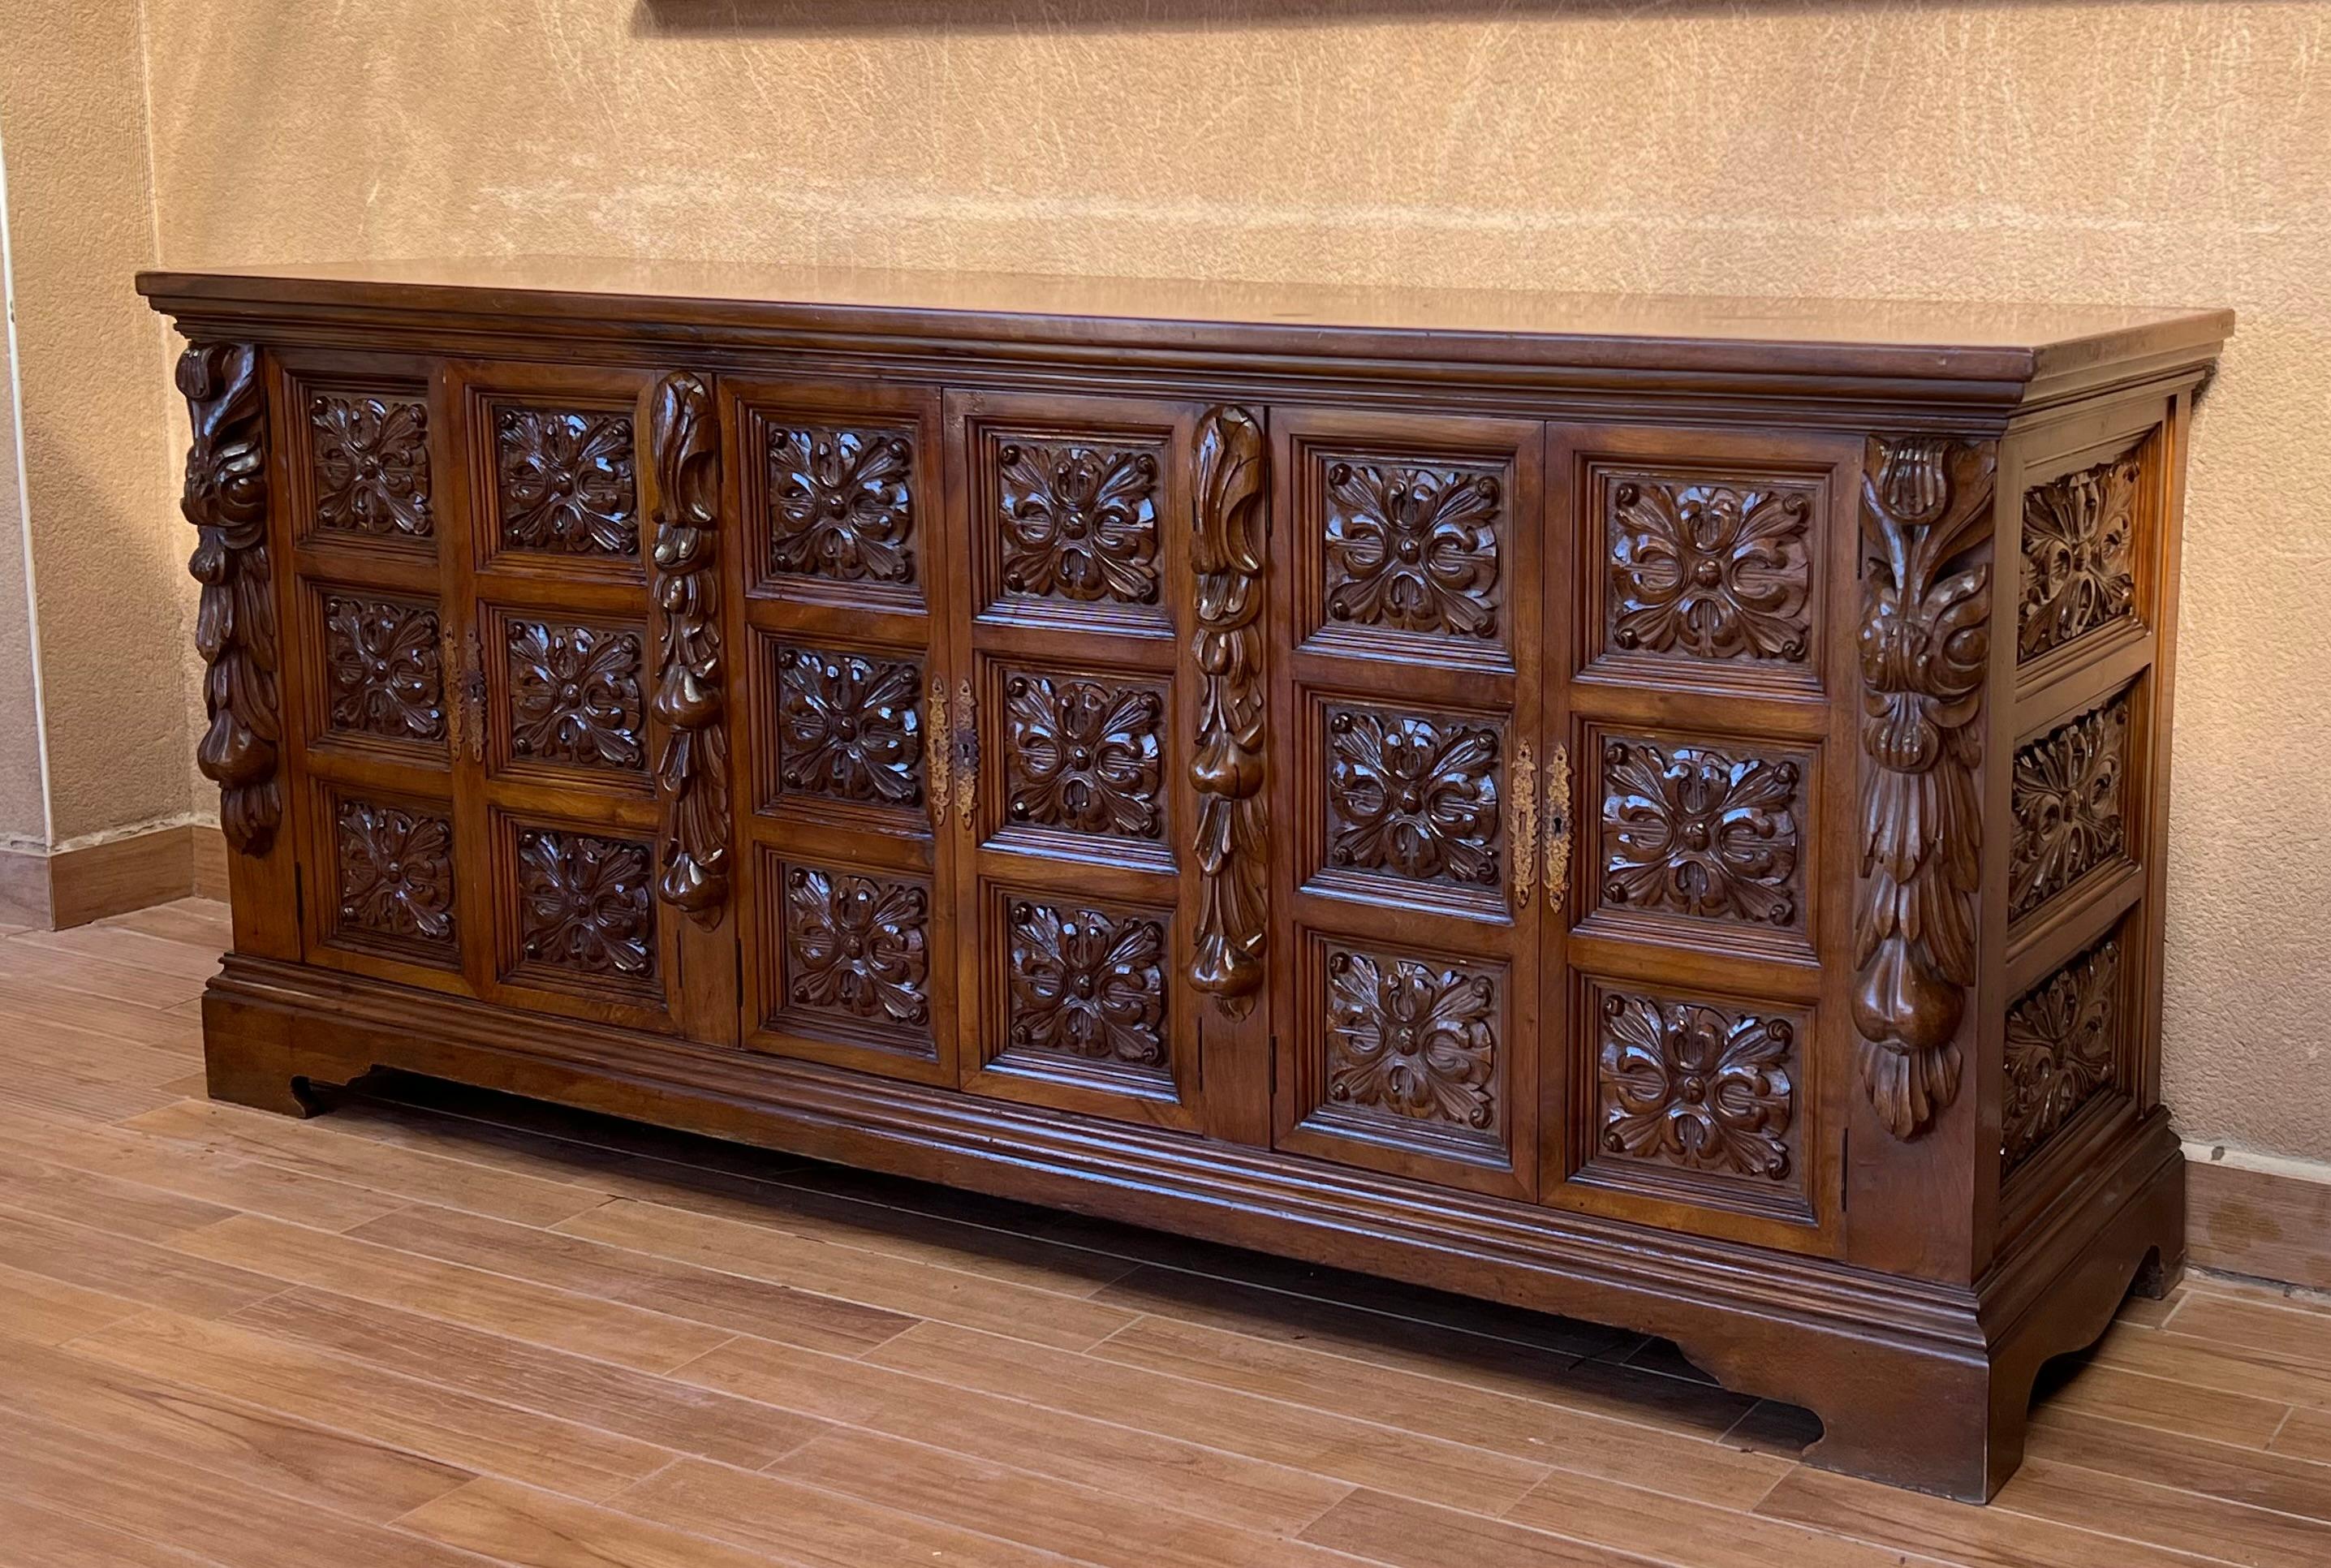 Baroque Antique Spanish Carved Walnut Sideboard with Florals Reliefs, circa 1870-1880 For Sale